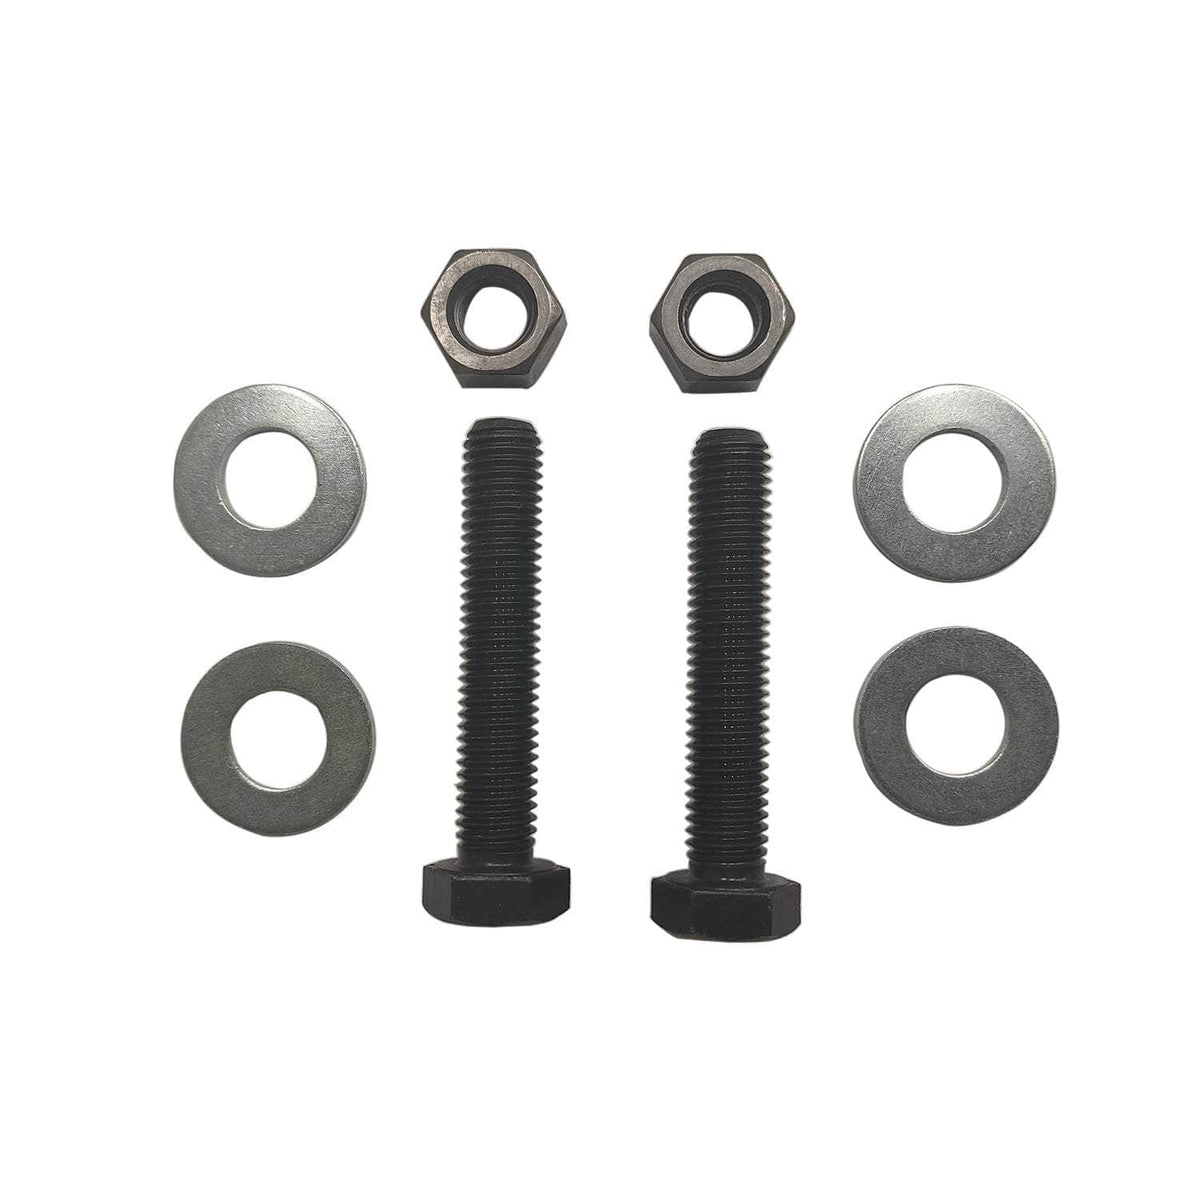 Barrel to Oven M12 Bolts, Nuts &amp; Washers (pair) for use with Aga range cookers